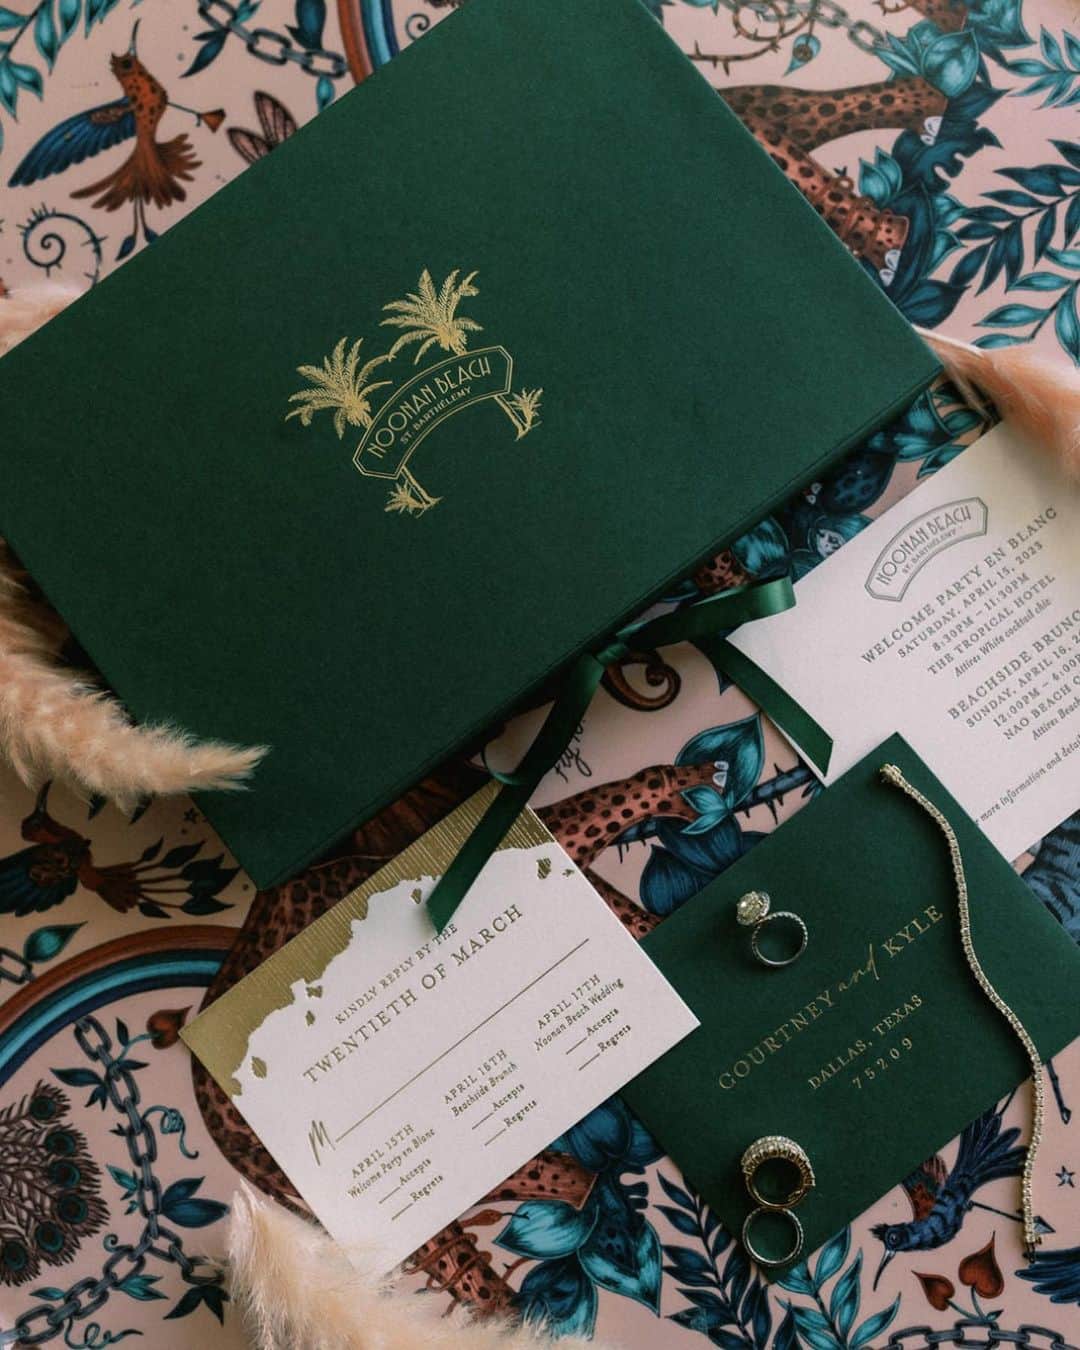 Ceci Johnsonさんのインスタグラム写真 - (Ceci JohnsonInstagram)「Dream wedding *activated*. Invite your guests with a first glimpse of the fabulous weekend awaiting them.   Seen: Our invitation design for Bravo Star @Kerrently and @KyleNoonan's destination wedding in St. Barths! Take a look inside at the link in our bio. 💌 ✨   Invitation Design & Event Branding: @cecinewyork Planner: @epicpresentations Event Designer: @epicpresentations 📸 & 🎥: @thebrothersmartens Ceremony & Reception Site: @nikkibeachsaintbarth Florist: @b_floralevents Officiants: Tori Bradburry & Josh Sepkowitz Wedding Dress: @alexperryofficial Reception & After-Party Dresses: @berta via @bblewisville Veil: @bblewisville Suits: @balanicustom Engagement & Wedding Rings: @diamondsdirect Hair and Makeup: @matwulff Wedding Party Attire: @alexperryofficial, @balanicustom Rental Equipment: @nikkibeachsaintbarth Catering: @nikkibeachsaintbarth Cake: @chokolavany.stbarth Entertainment: @nikkibeachsaintbarth, @blackrabbitprojects Welcome Bags: @epicpresentations Transportation: @coolrental  #luxuryweddinginvitations #bespokeweddinginvitations #coutureweddinginvitations #elegantweddinginvitations #cecinewyork #cecicouture #luxurywedding #highendweddings #weddingstationery #weddinginvites #weddingdetails #weddinginspiration #stbarthwedding」4月26日 2時42分 - cecinewyork